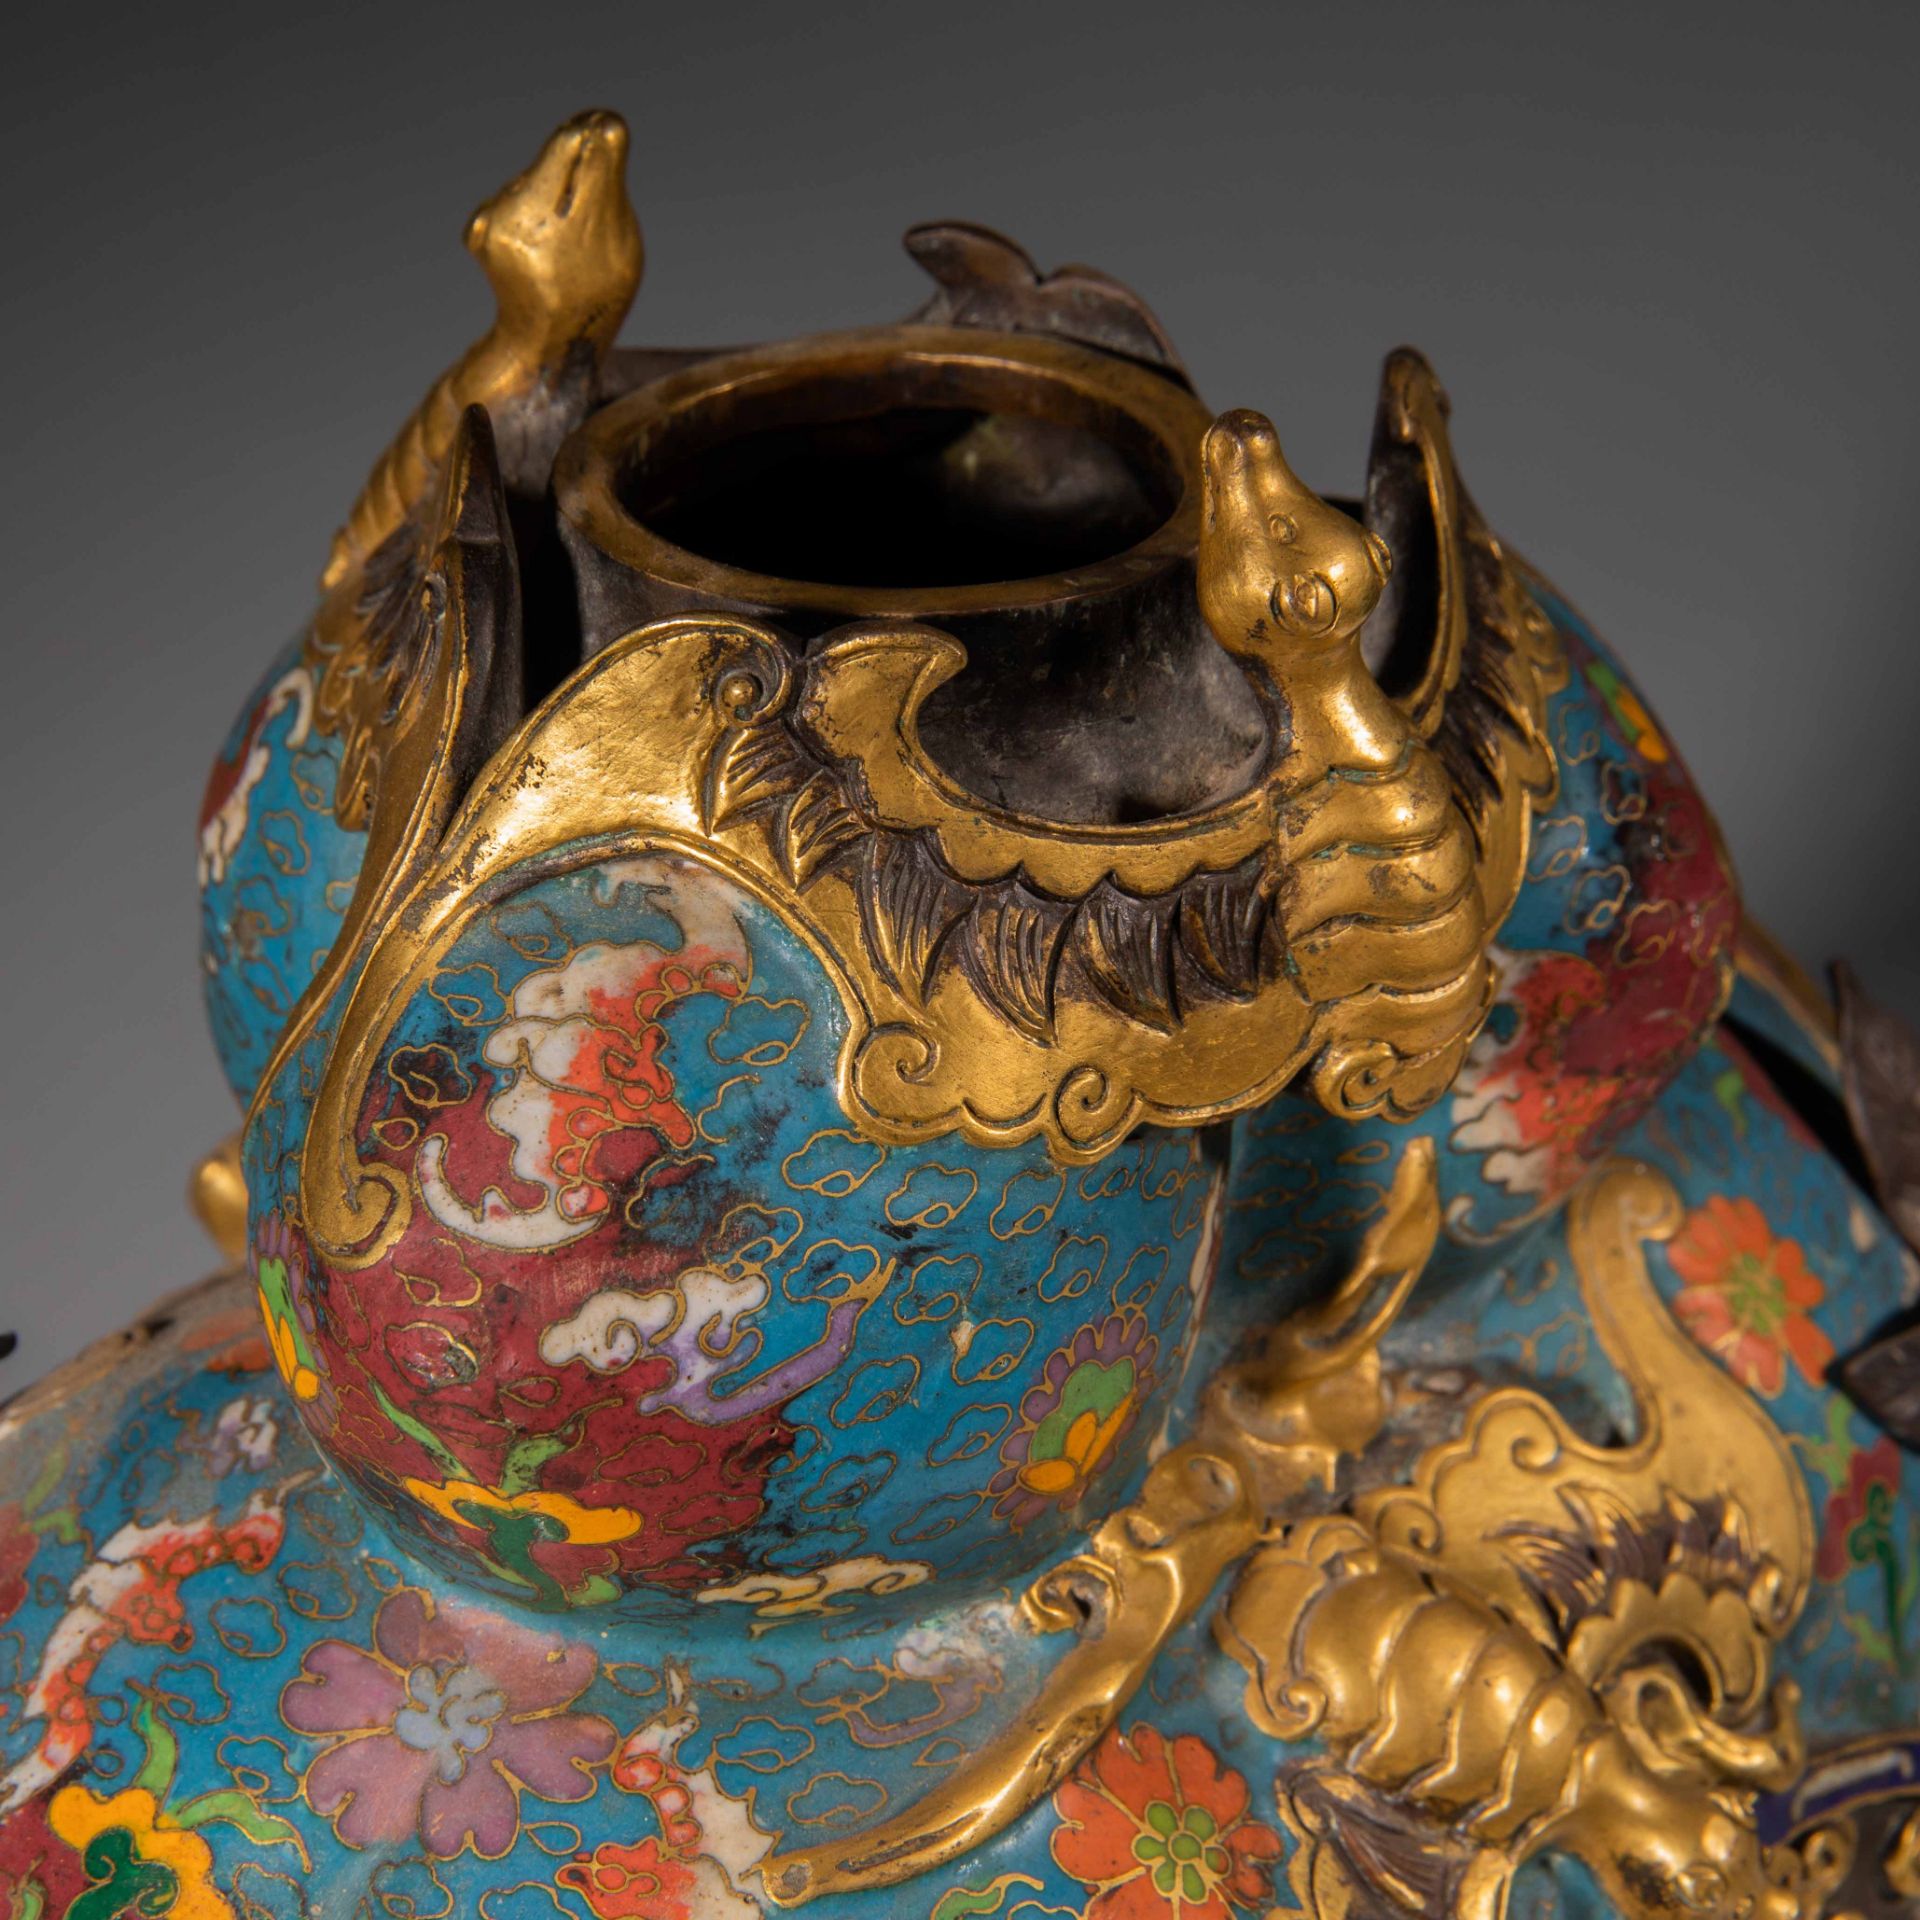 A Qianlong-marked Cloisonne Vase, Qing Dynasty, China - Image 9 of 12